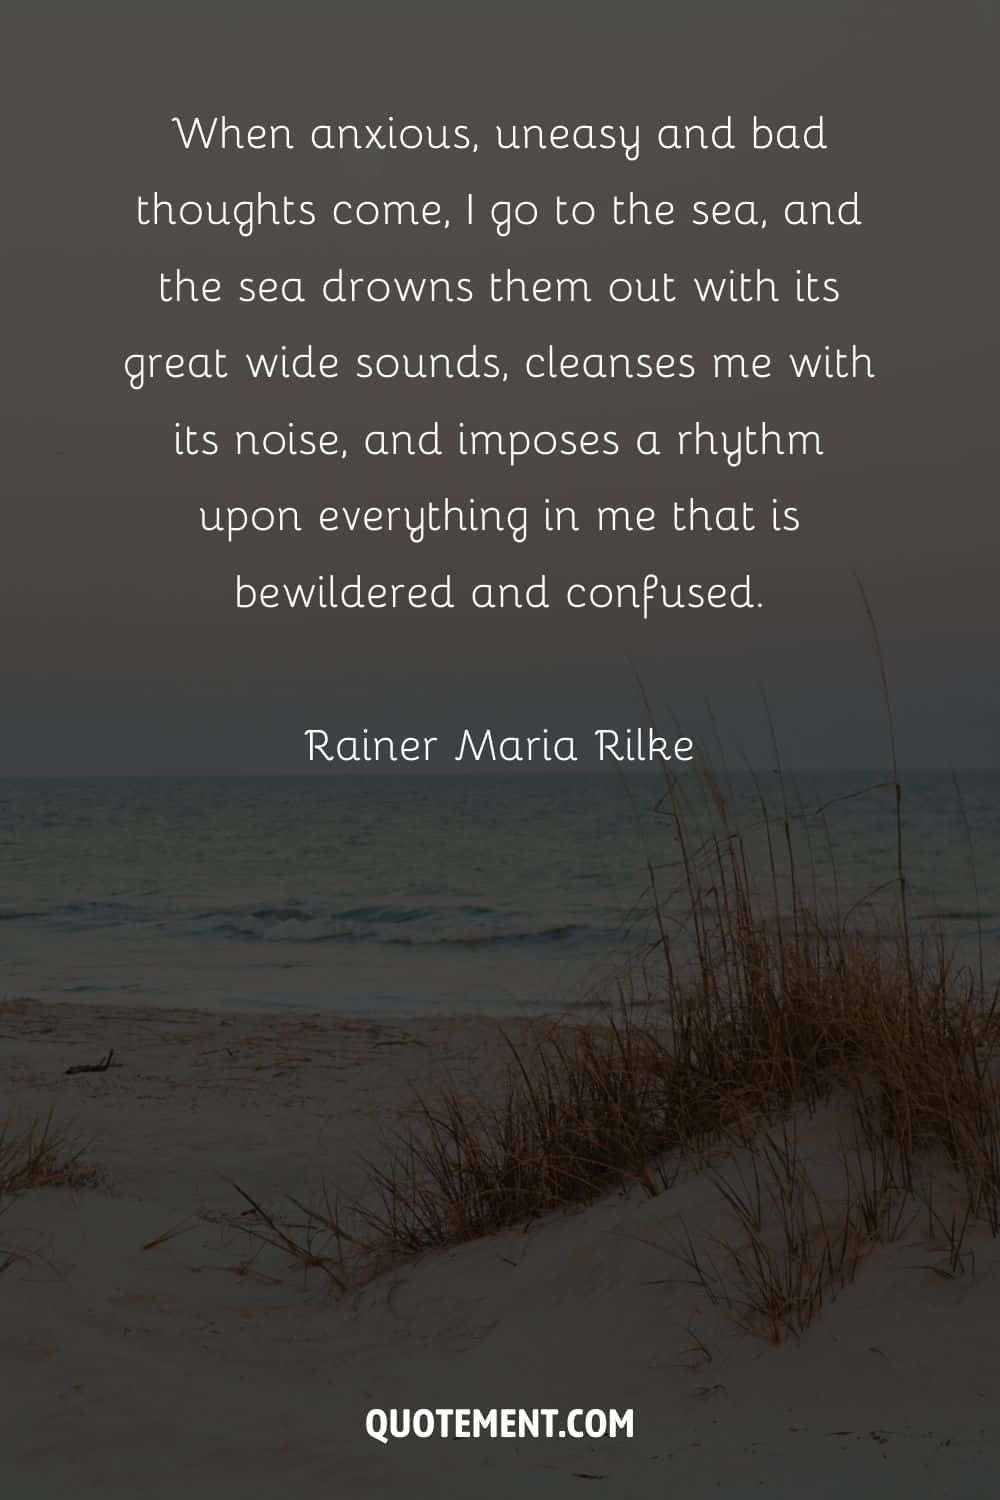 Extraordinary quote on the power of the sea and a beach.